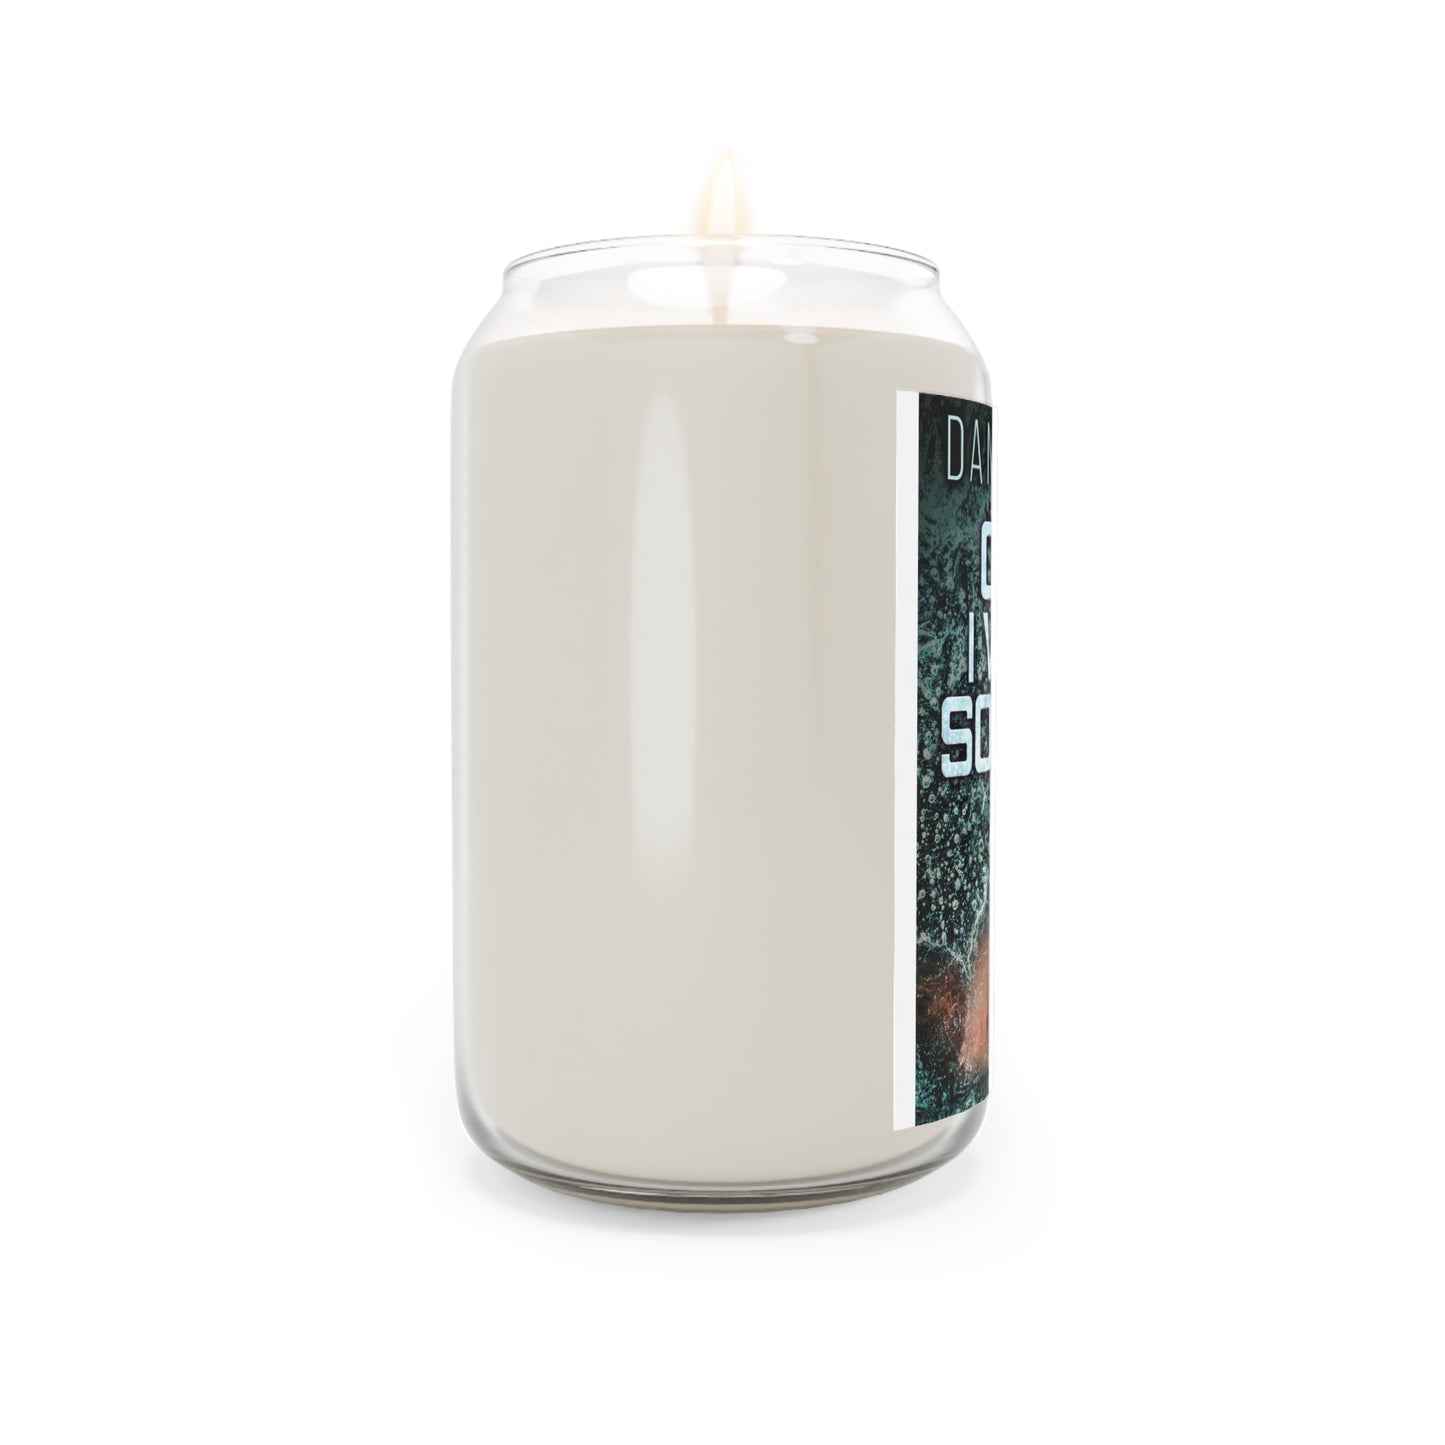 Once I Was A Soldier - Scented Candle